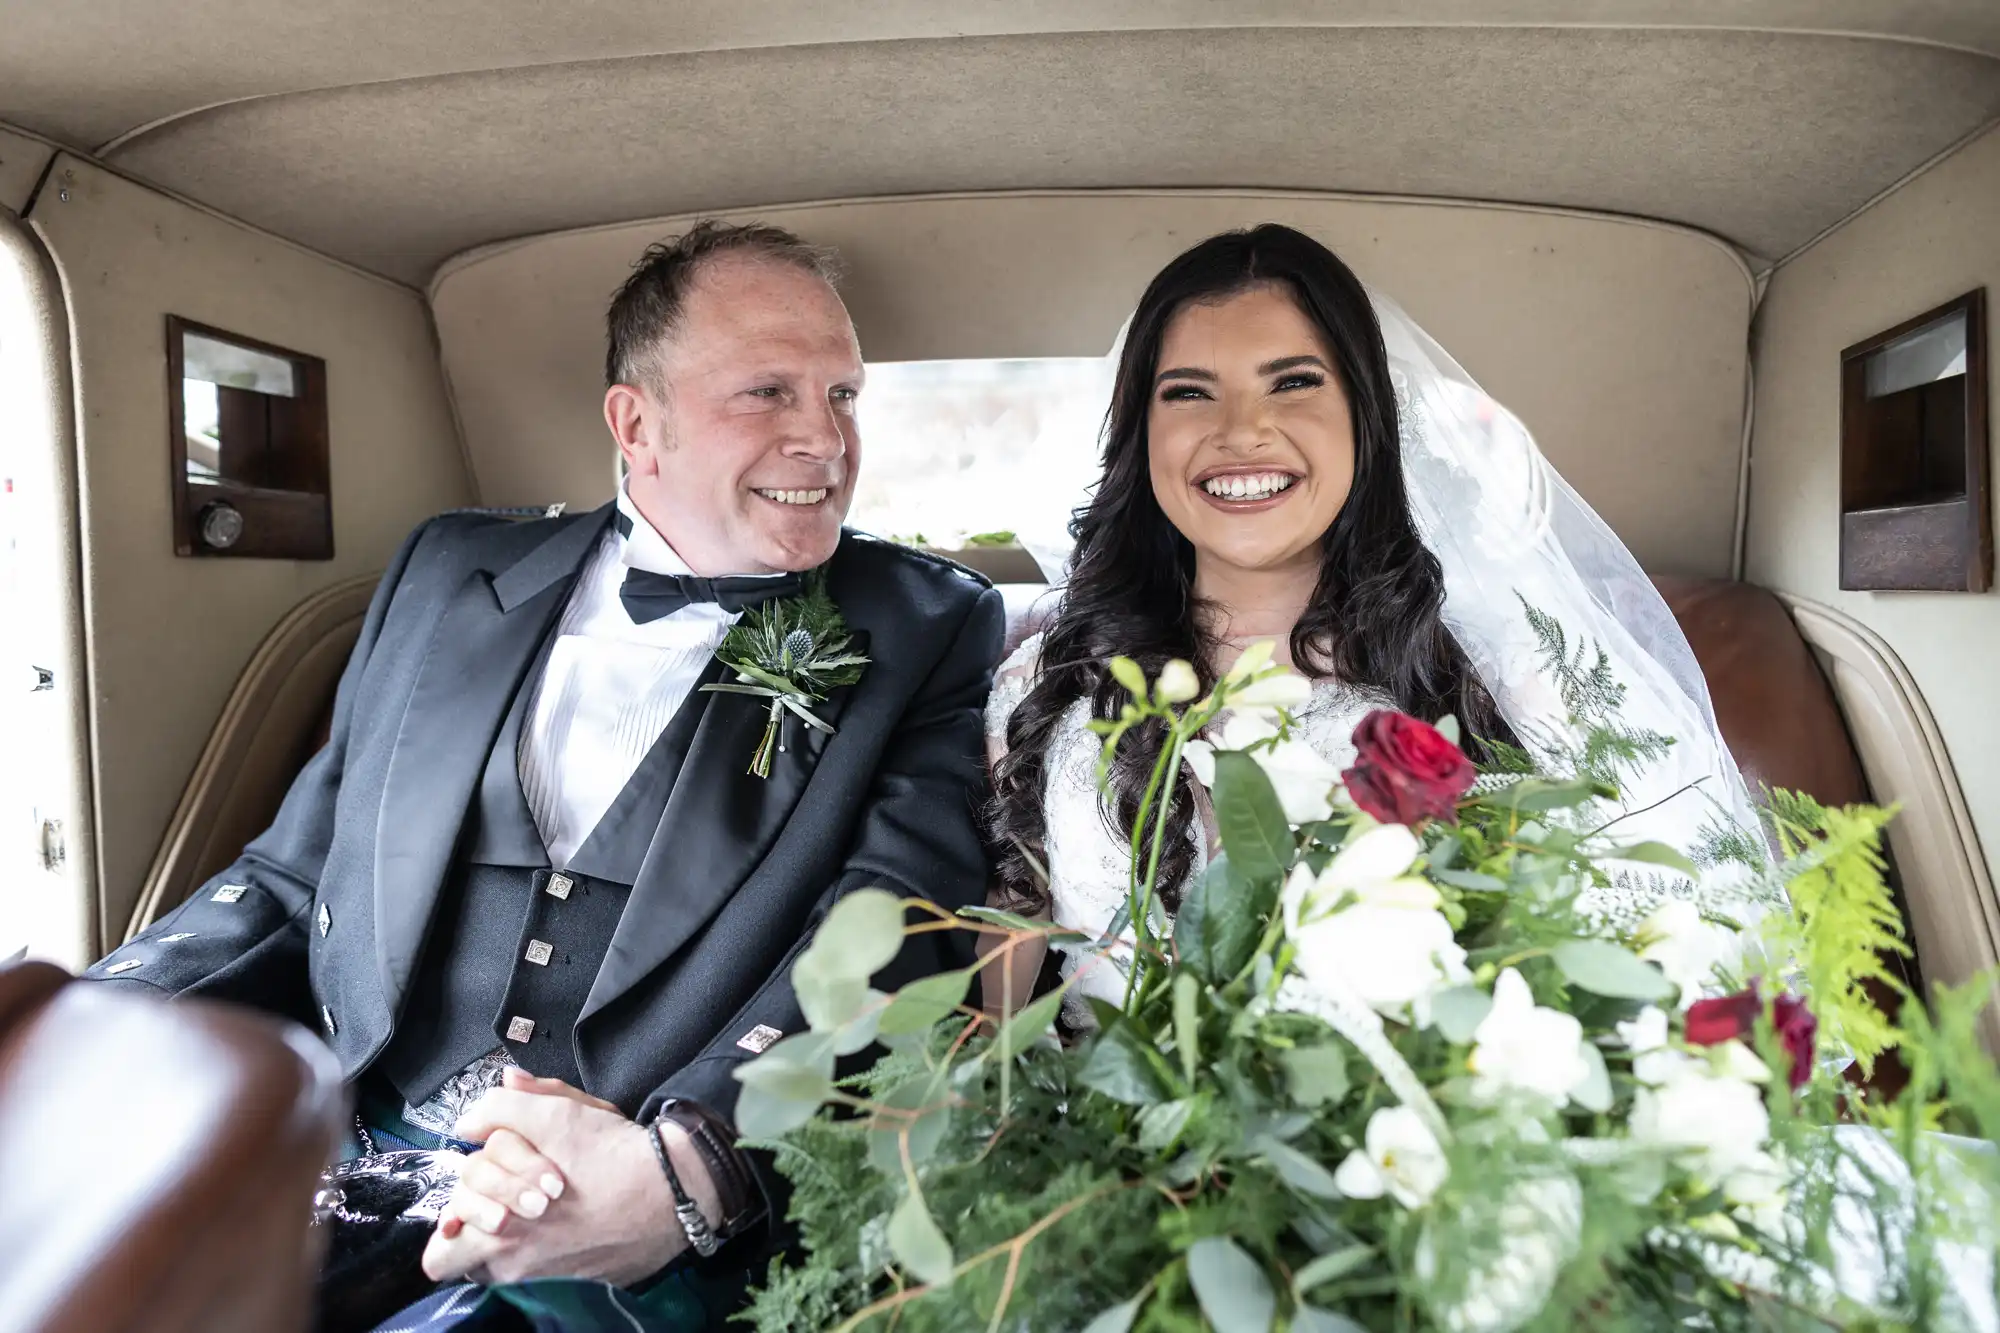 Bride and father smiling inside a vintage car, surrounded by floral decorations.